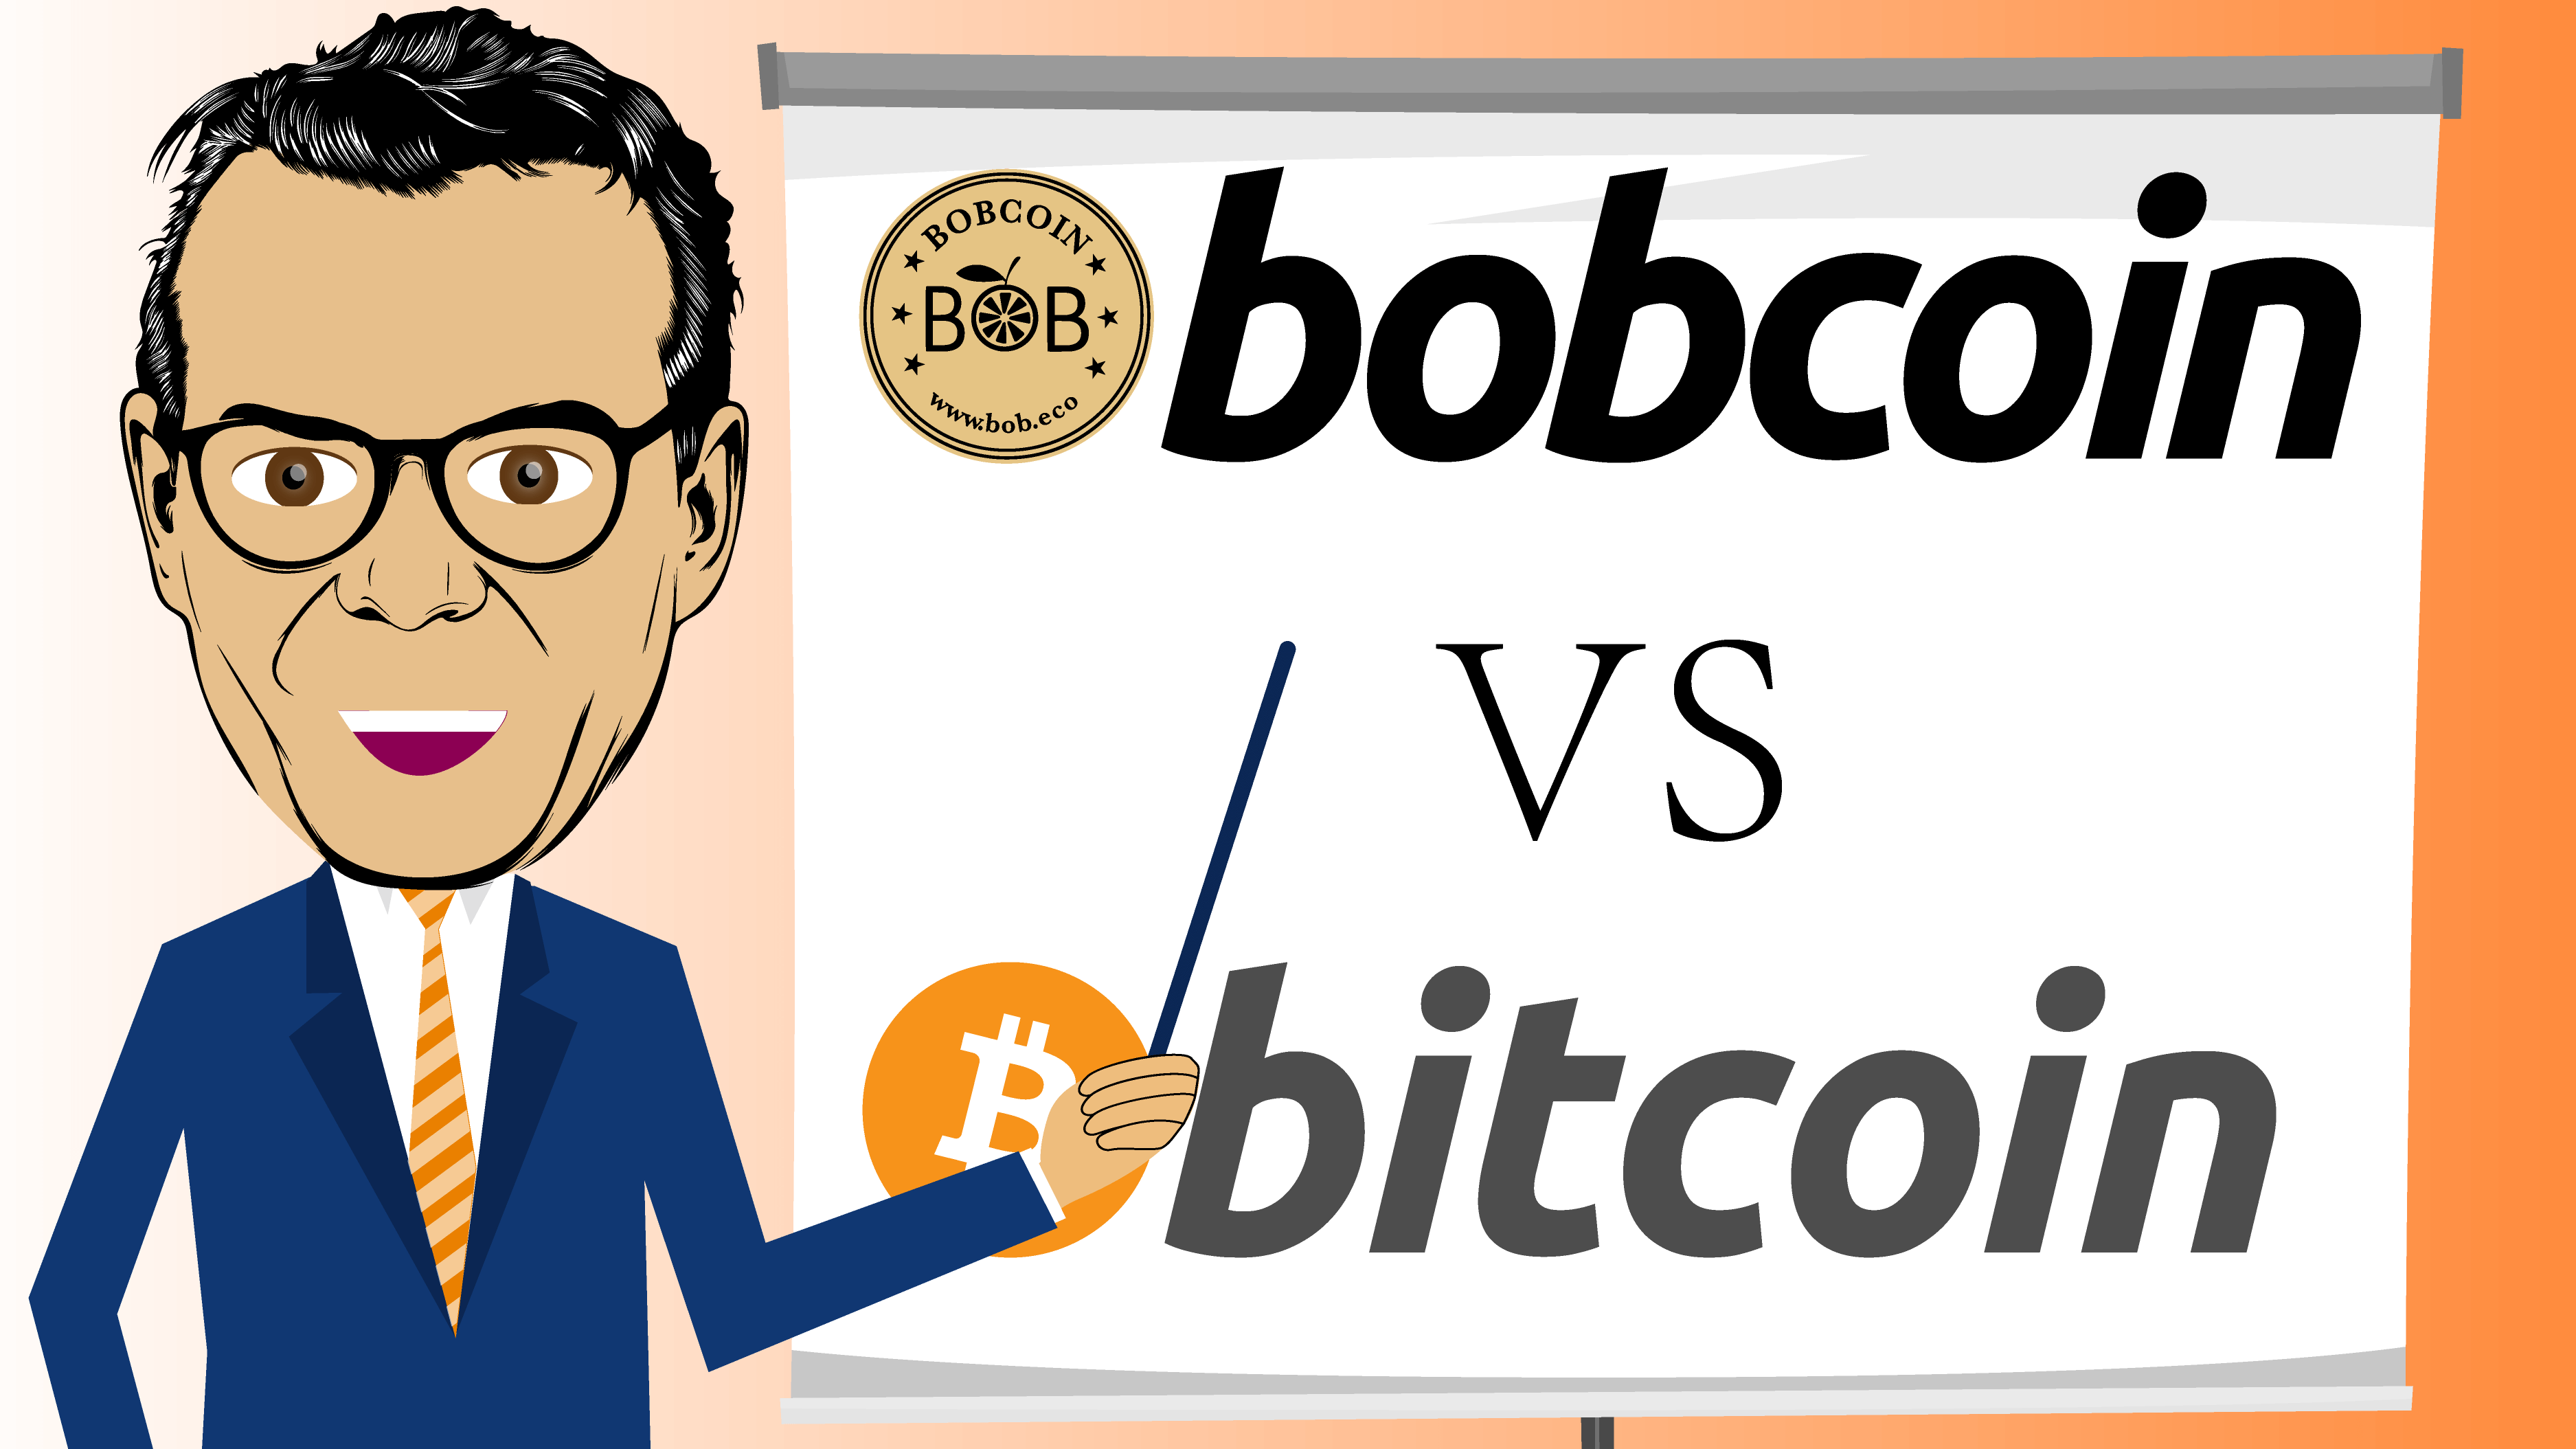 Bobcoin vs Bitcoin: Which is the Better Cryptocurrency To Invest In?